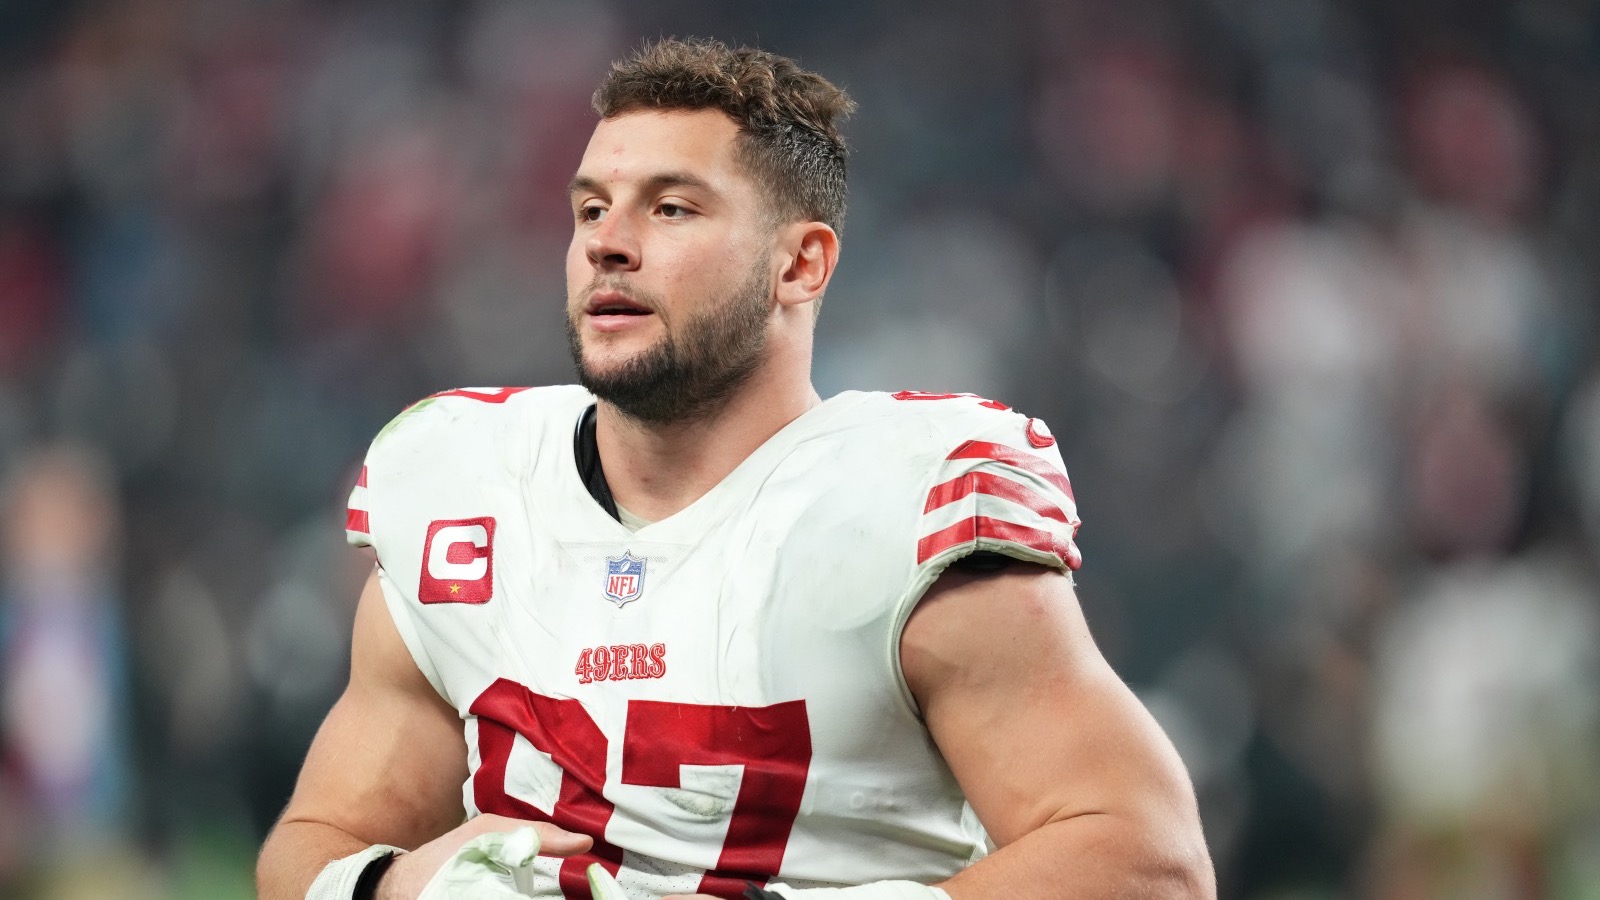 Nick Bosa's holdout from the San Francisco 49ers continues.